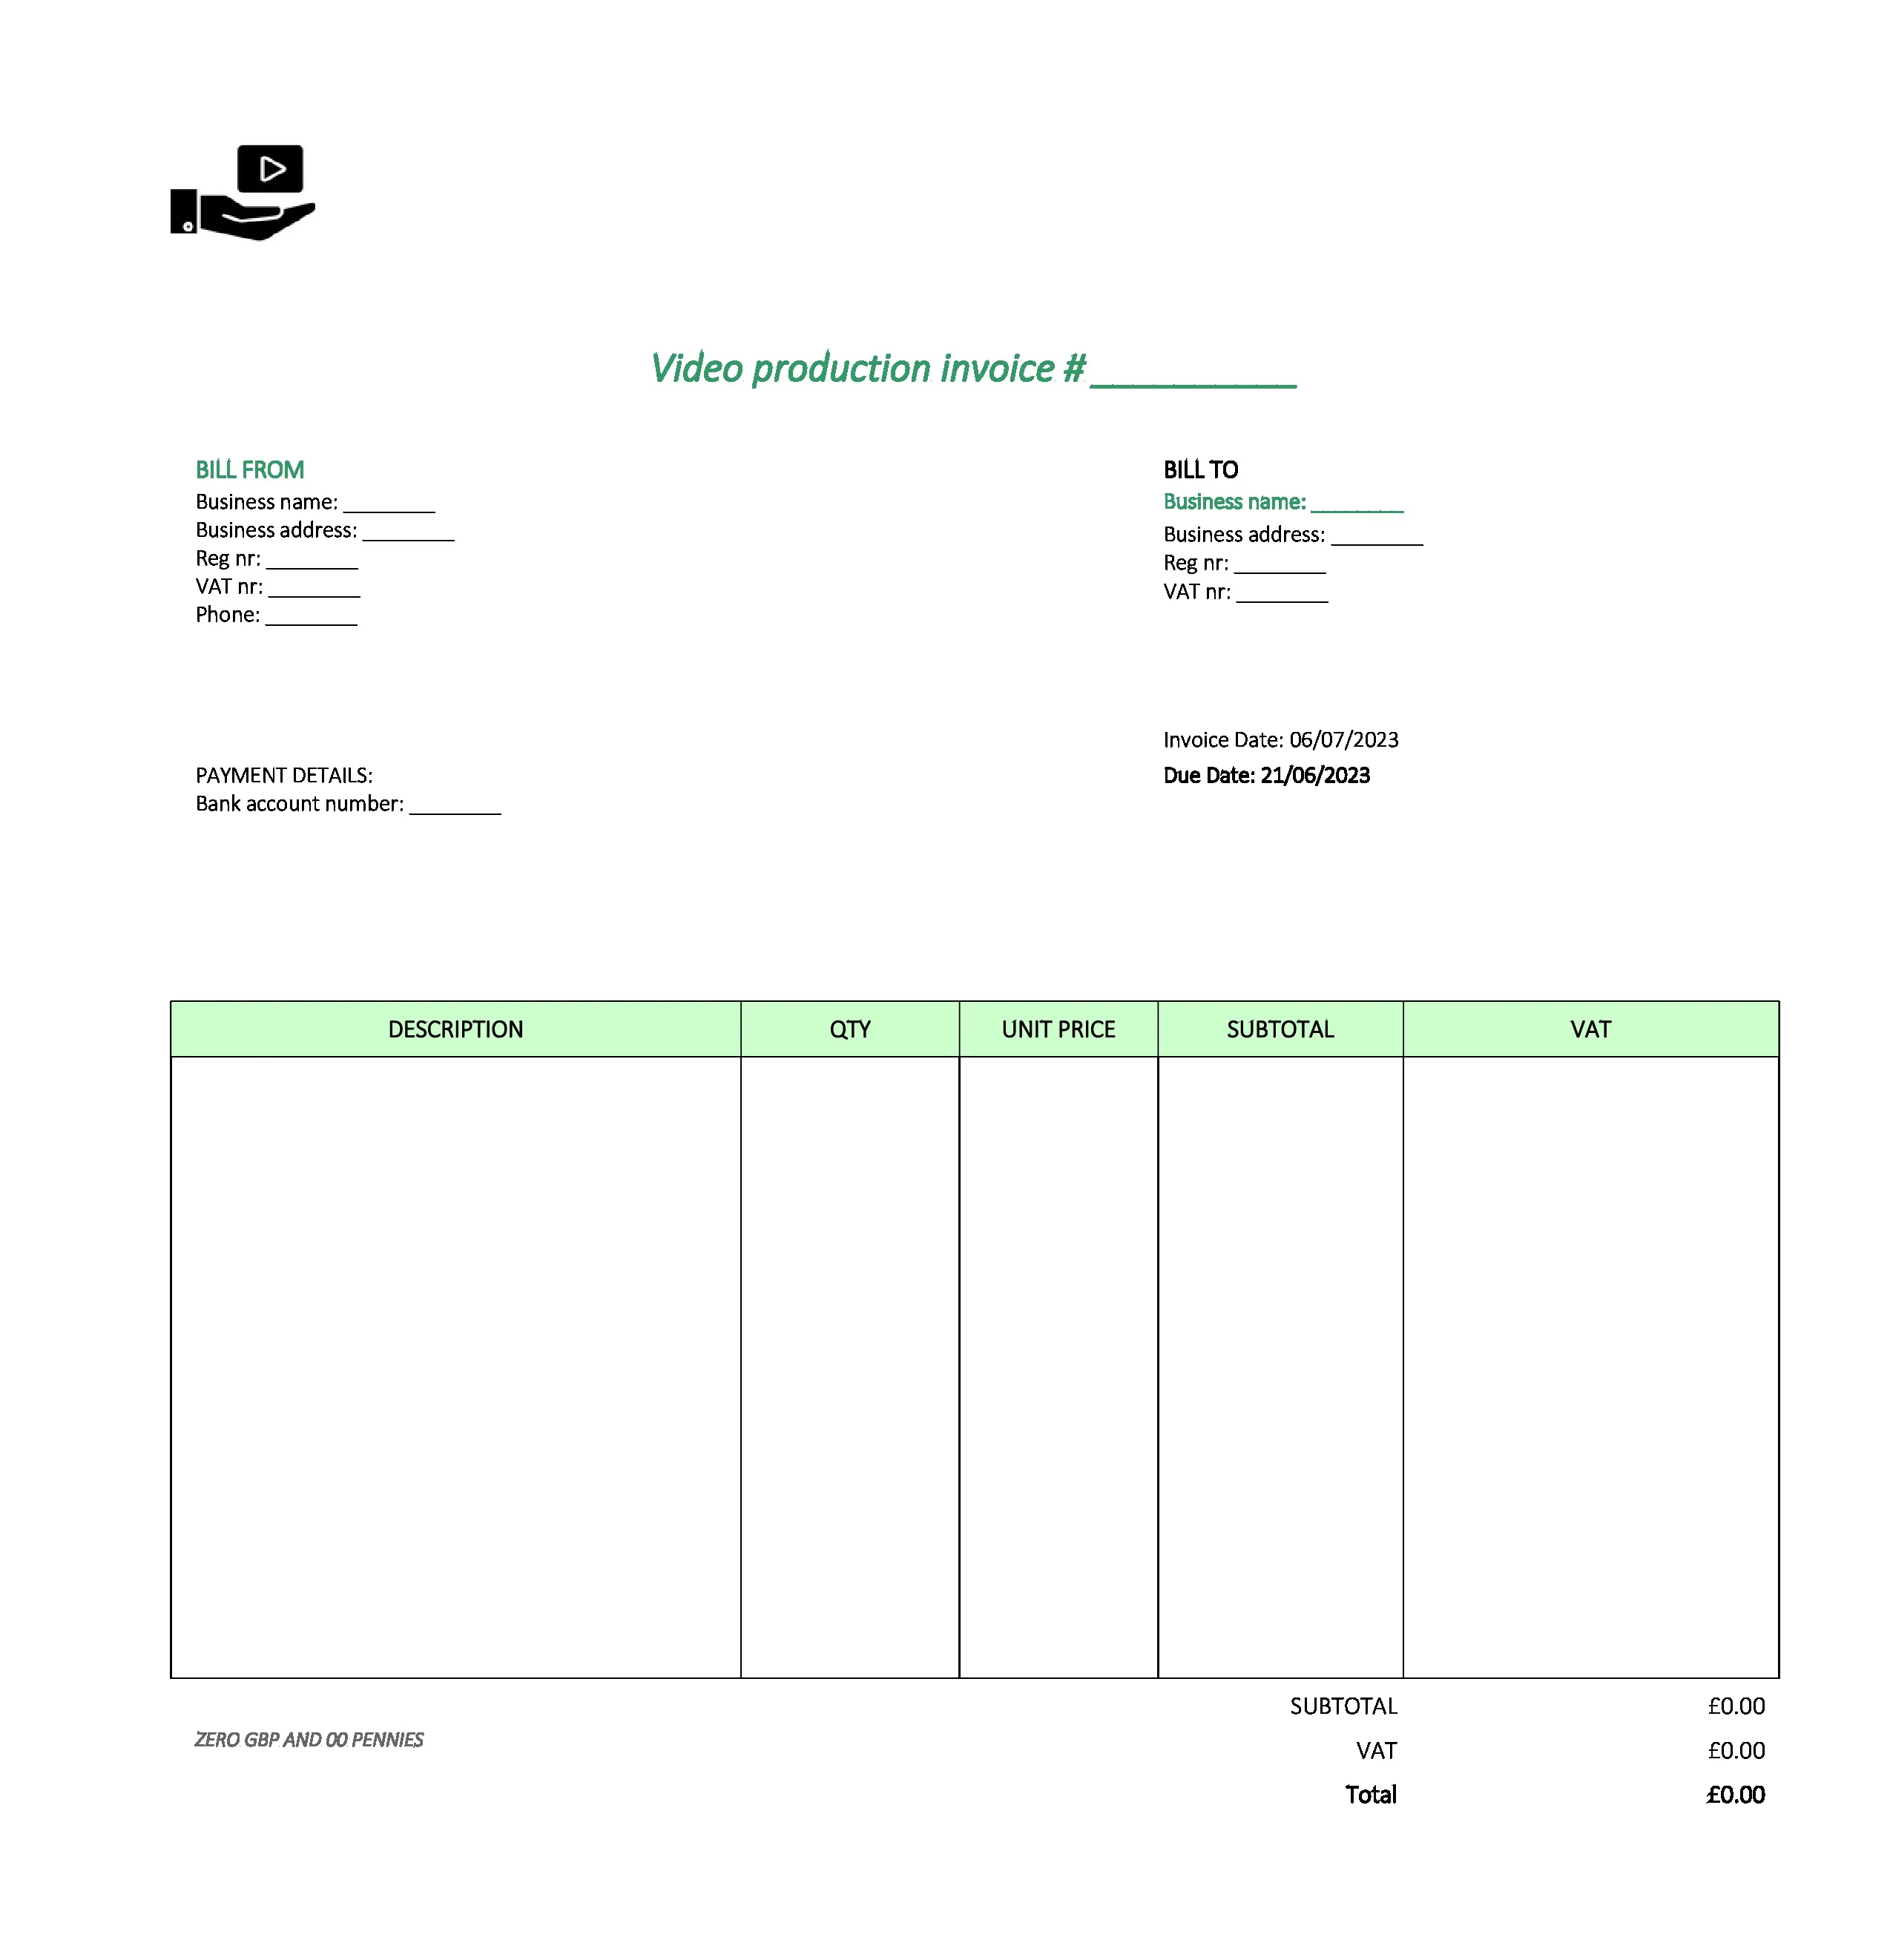 with logo video production invoice template UK Excel / Google sheets